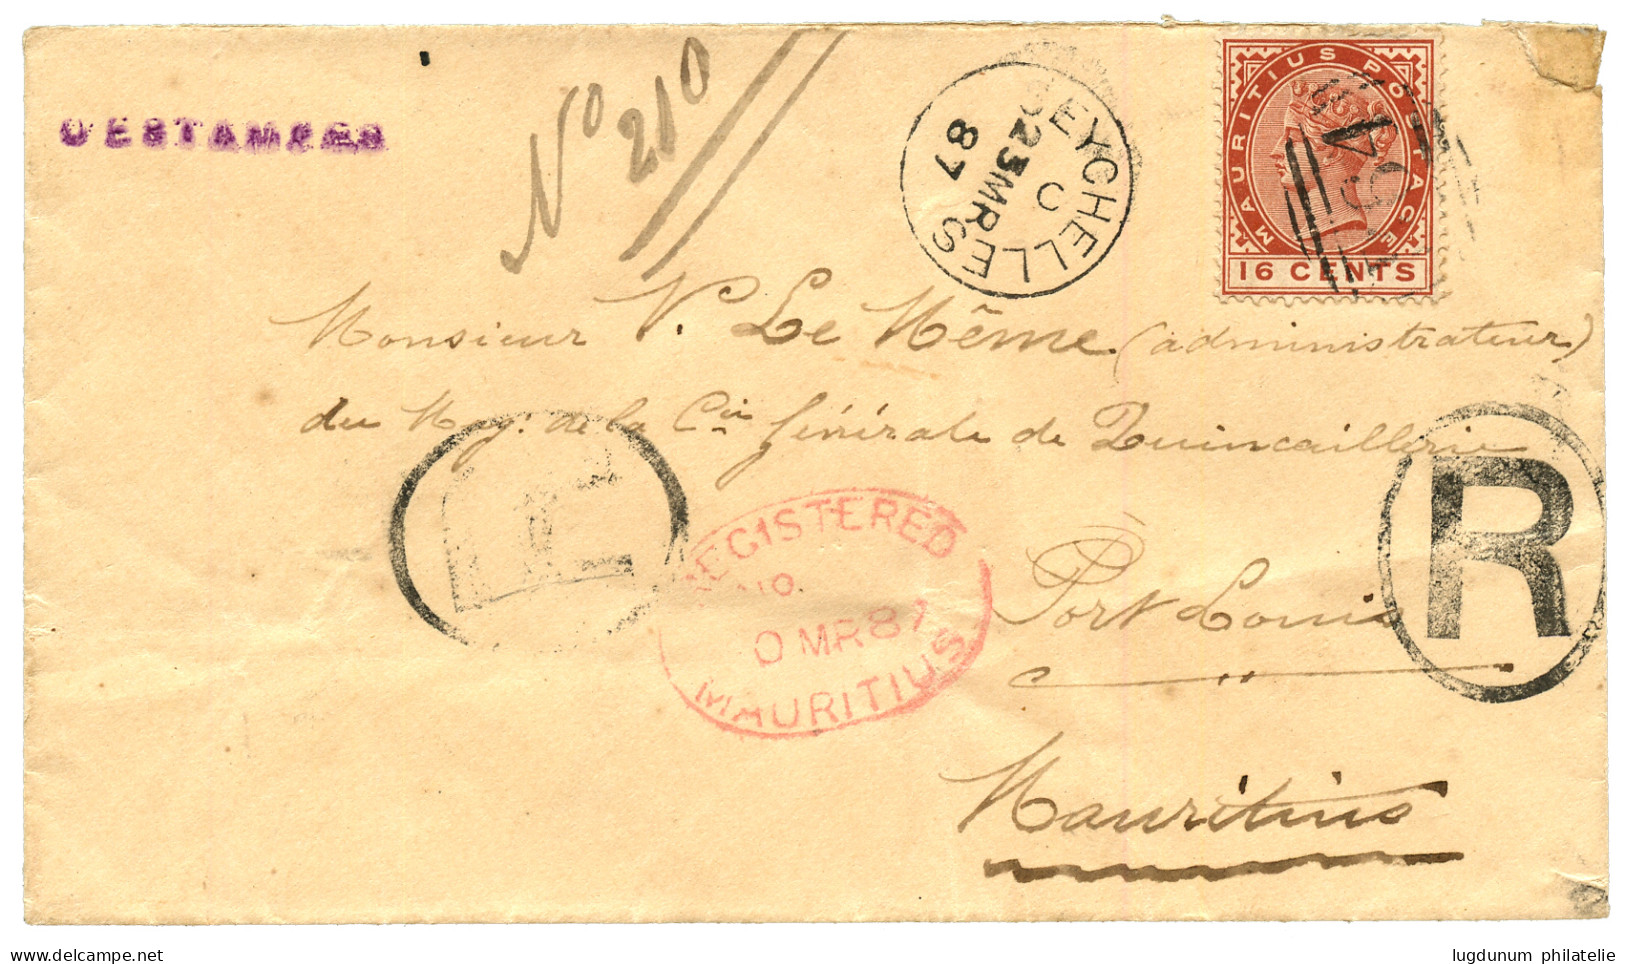 MAURITIUS - SEYCHELLES : 1887 MAURITIUS 16c Canc. B64 + SEYCHELLES On REGISTERED Envelope To MAURITIUS. REGISTERED Cover - Maurice (...-1967)